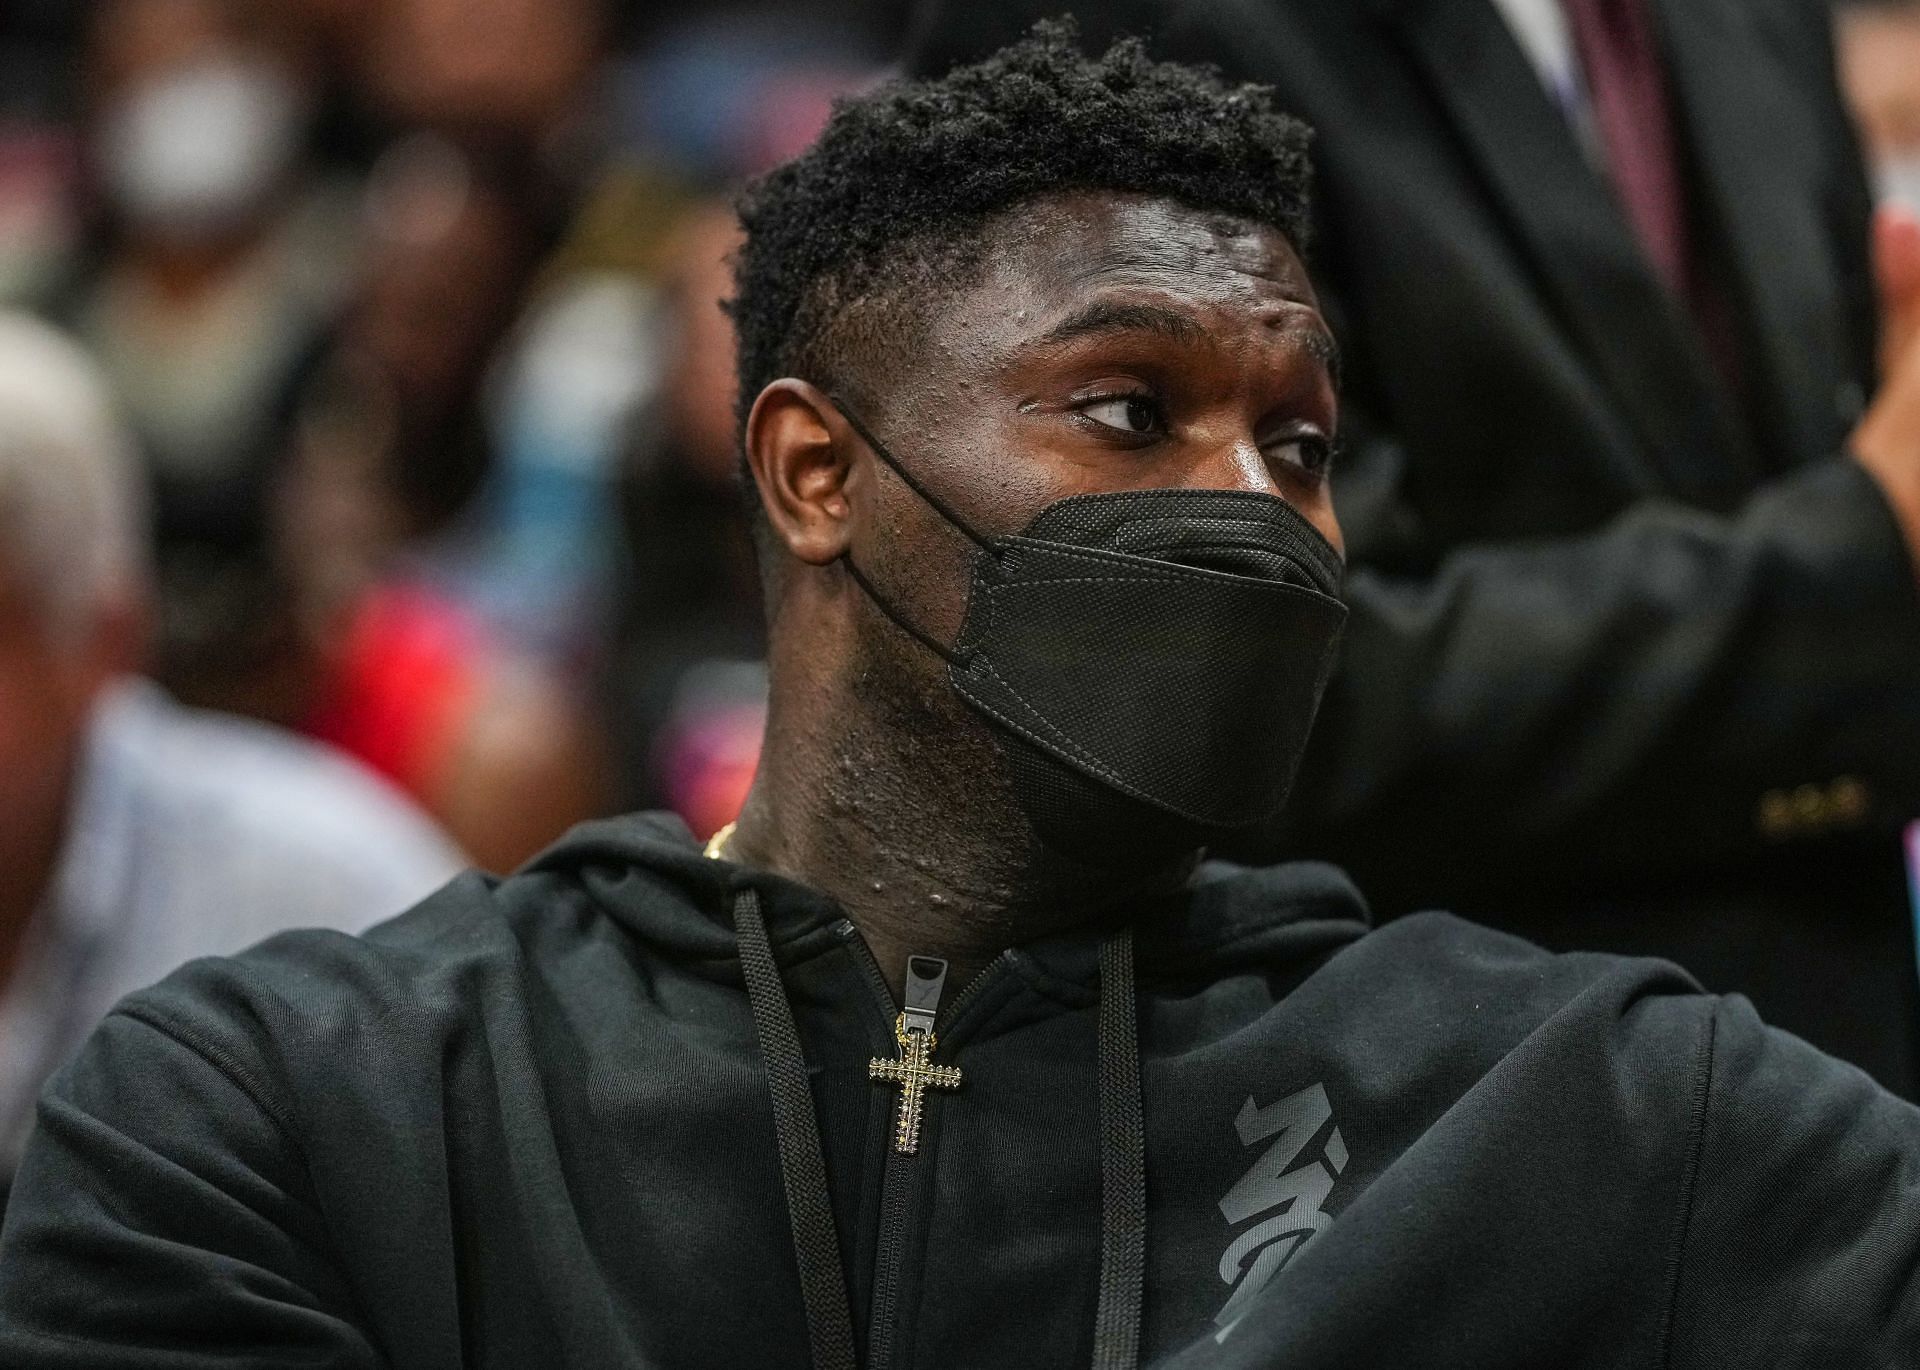 Zion Williamson continues to be sidelined from action